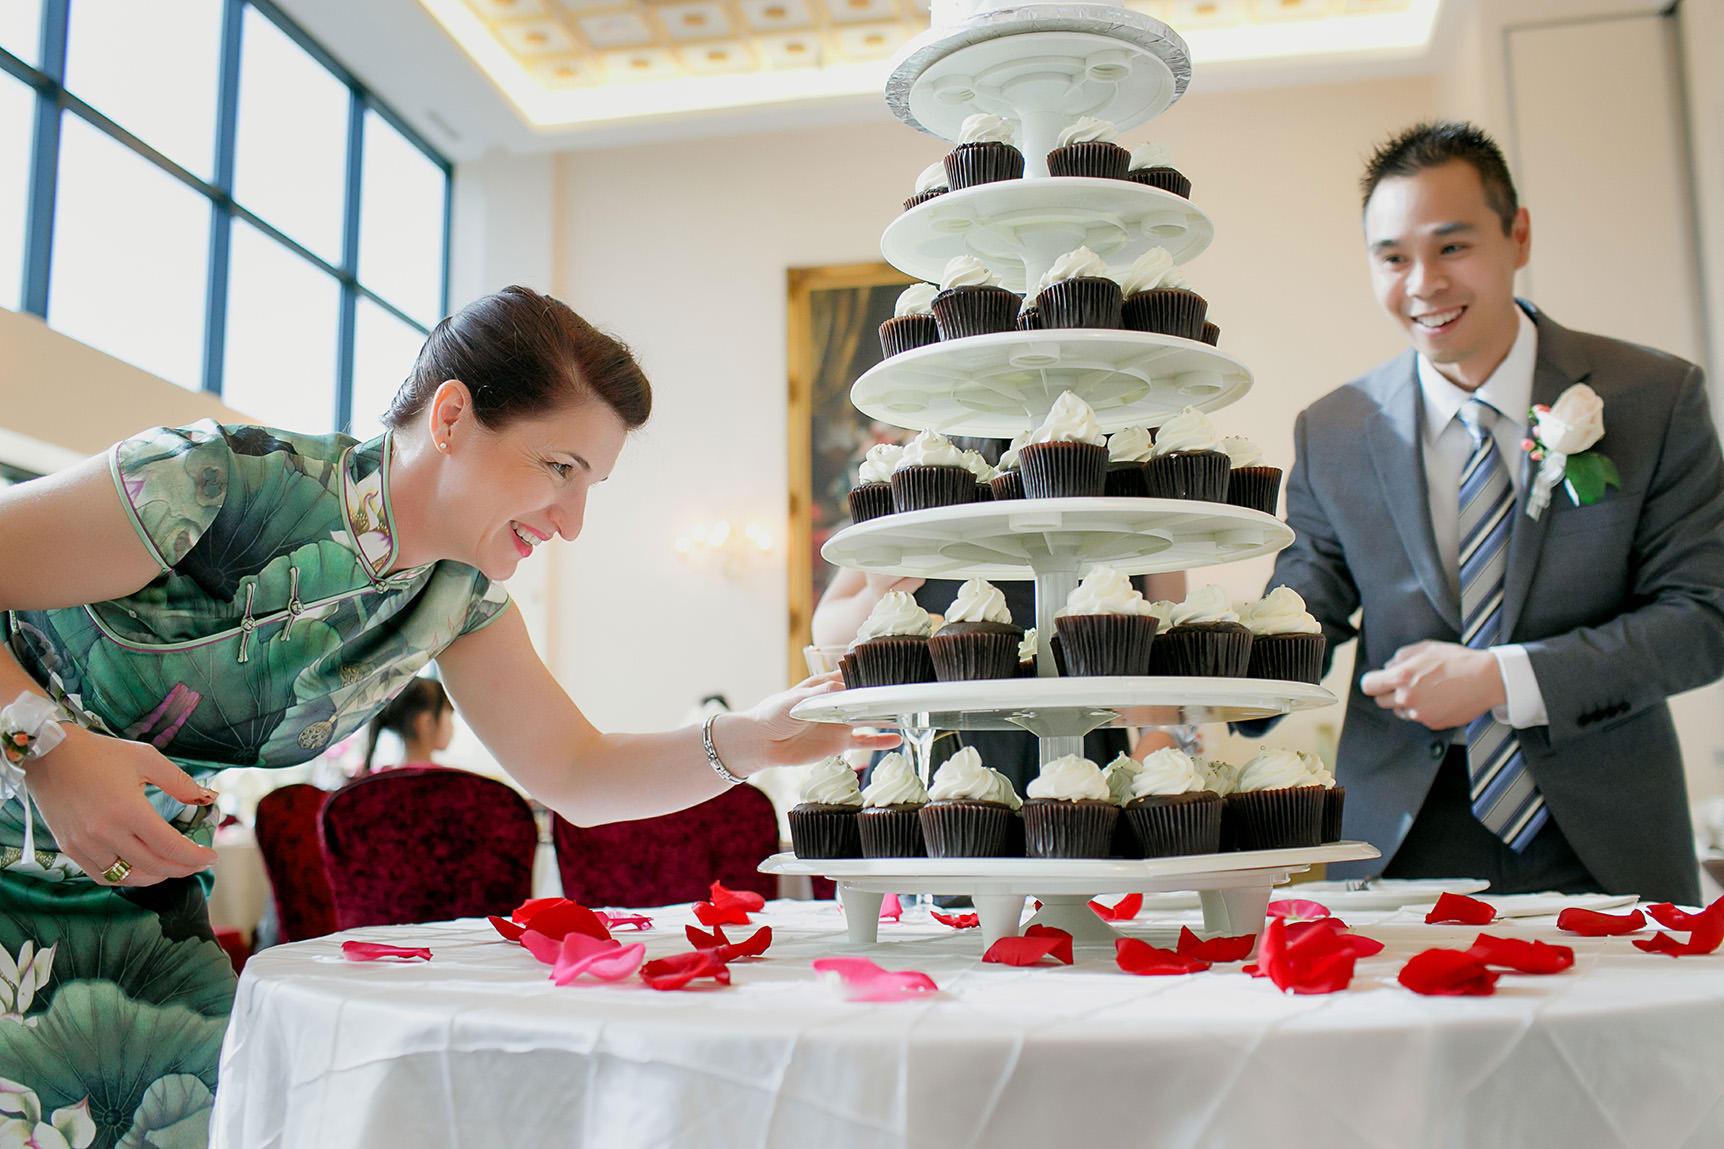 Bride and groom's friends decorate their cake stand